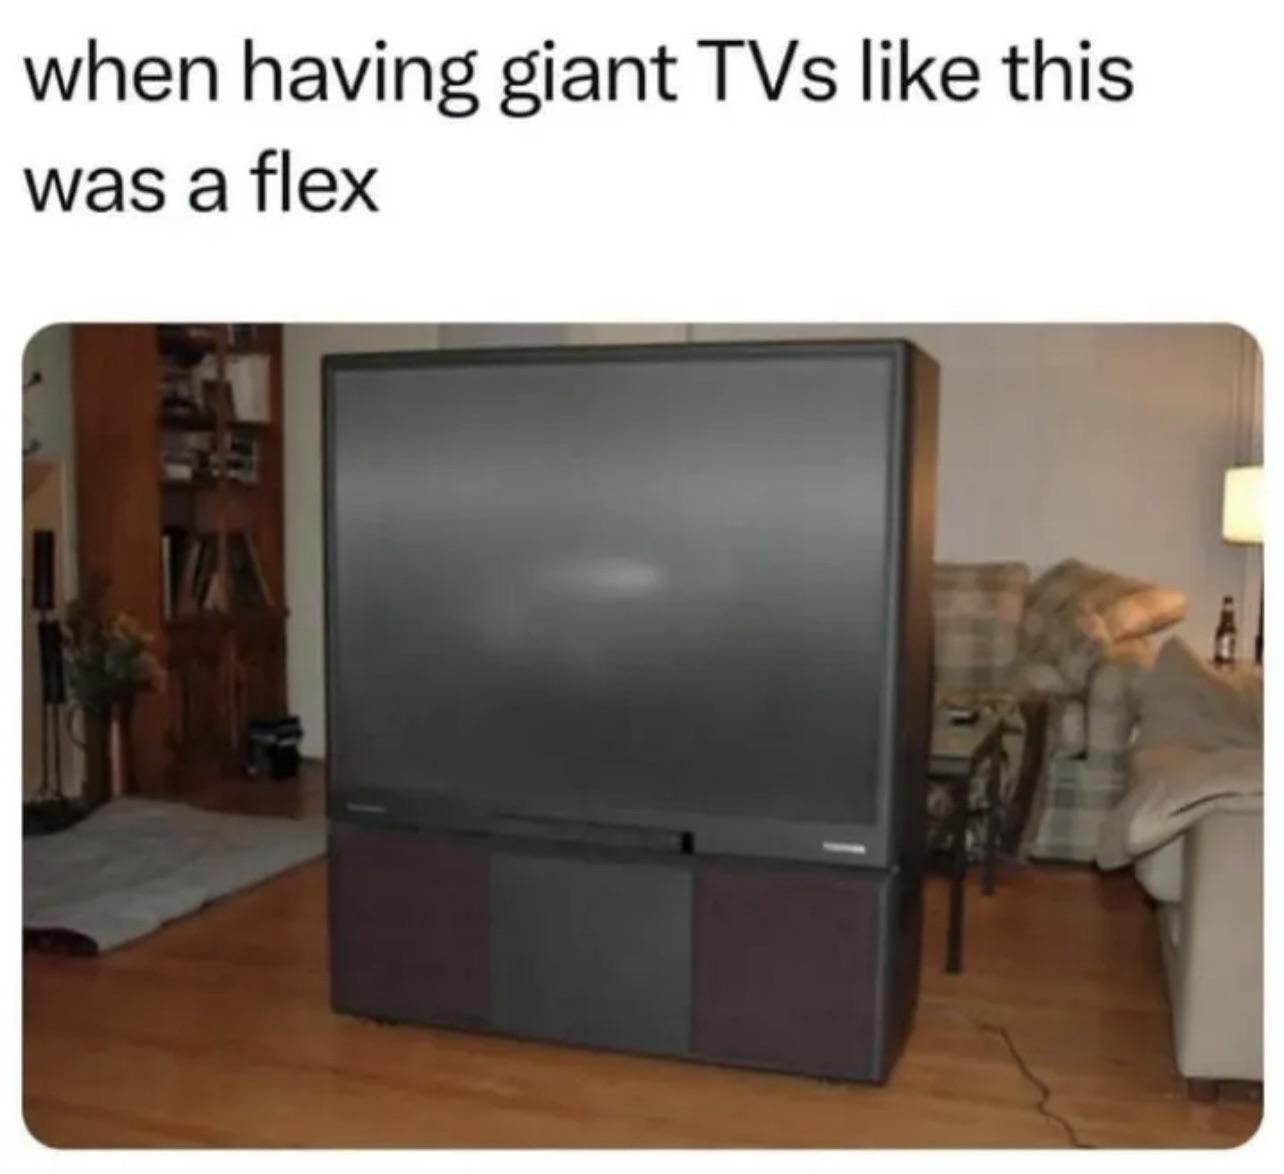 r/GenZ - Hopefully I’m not the only one here old enough to remember having a TV like this lol